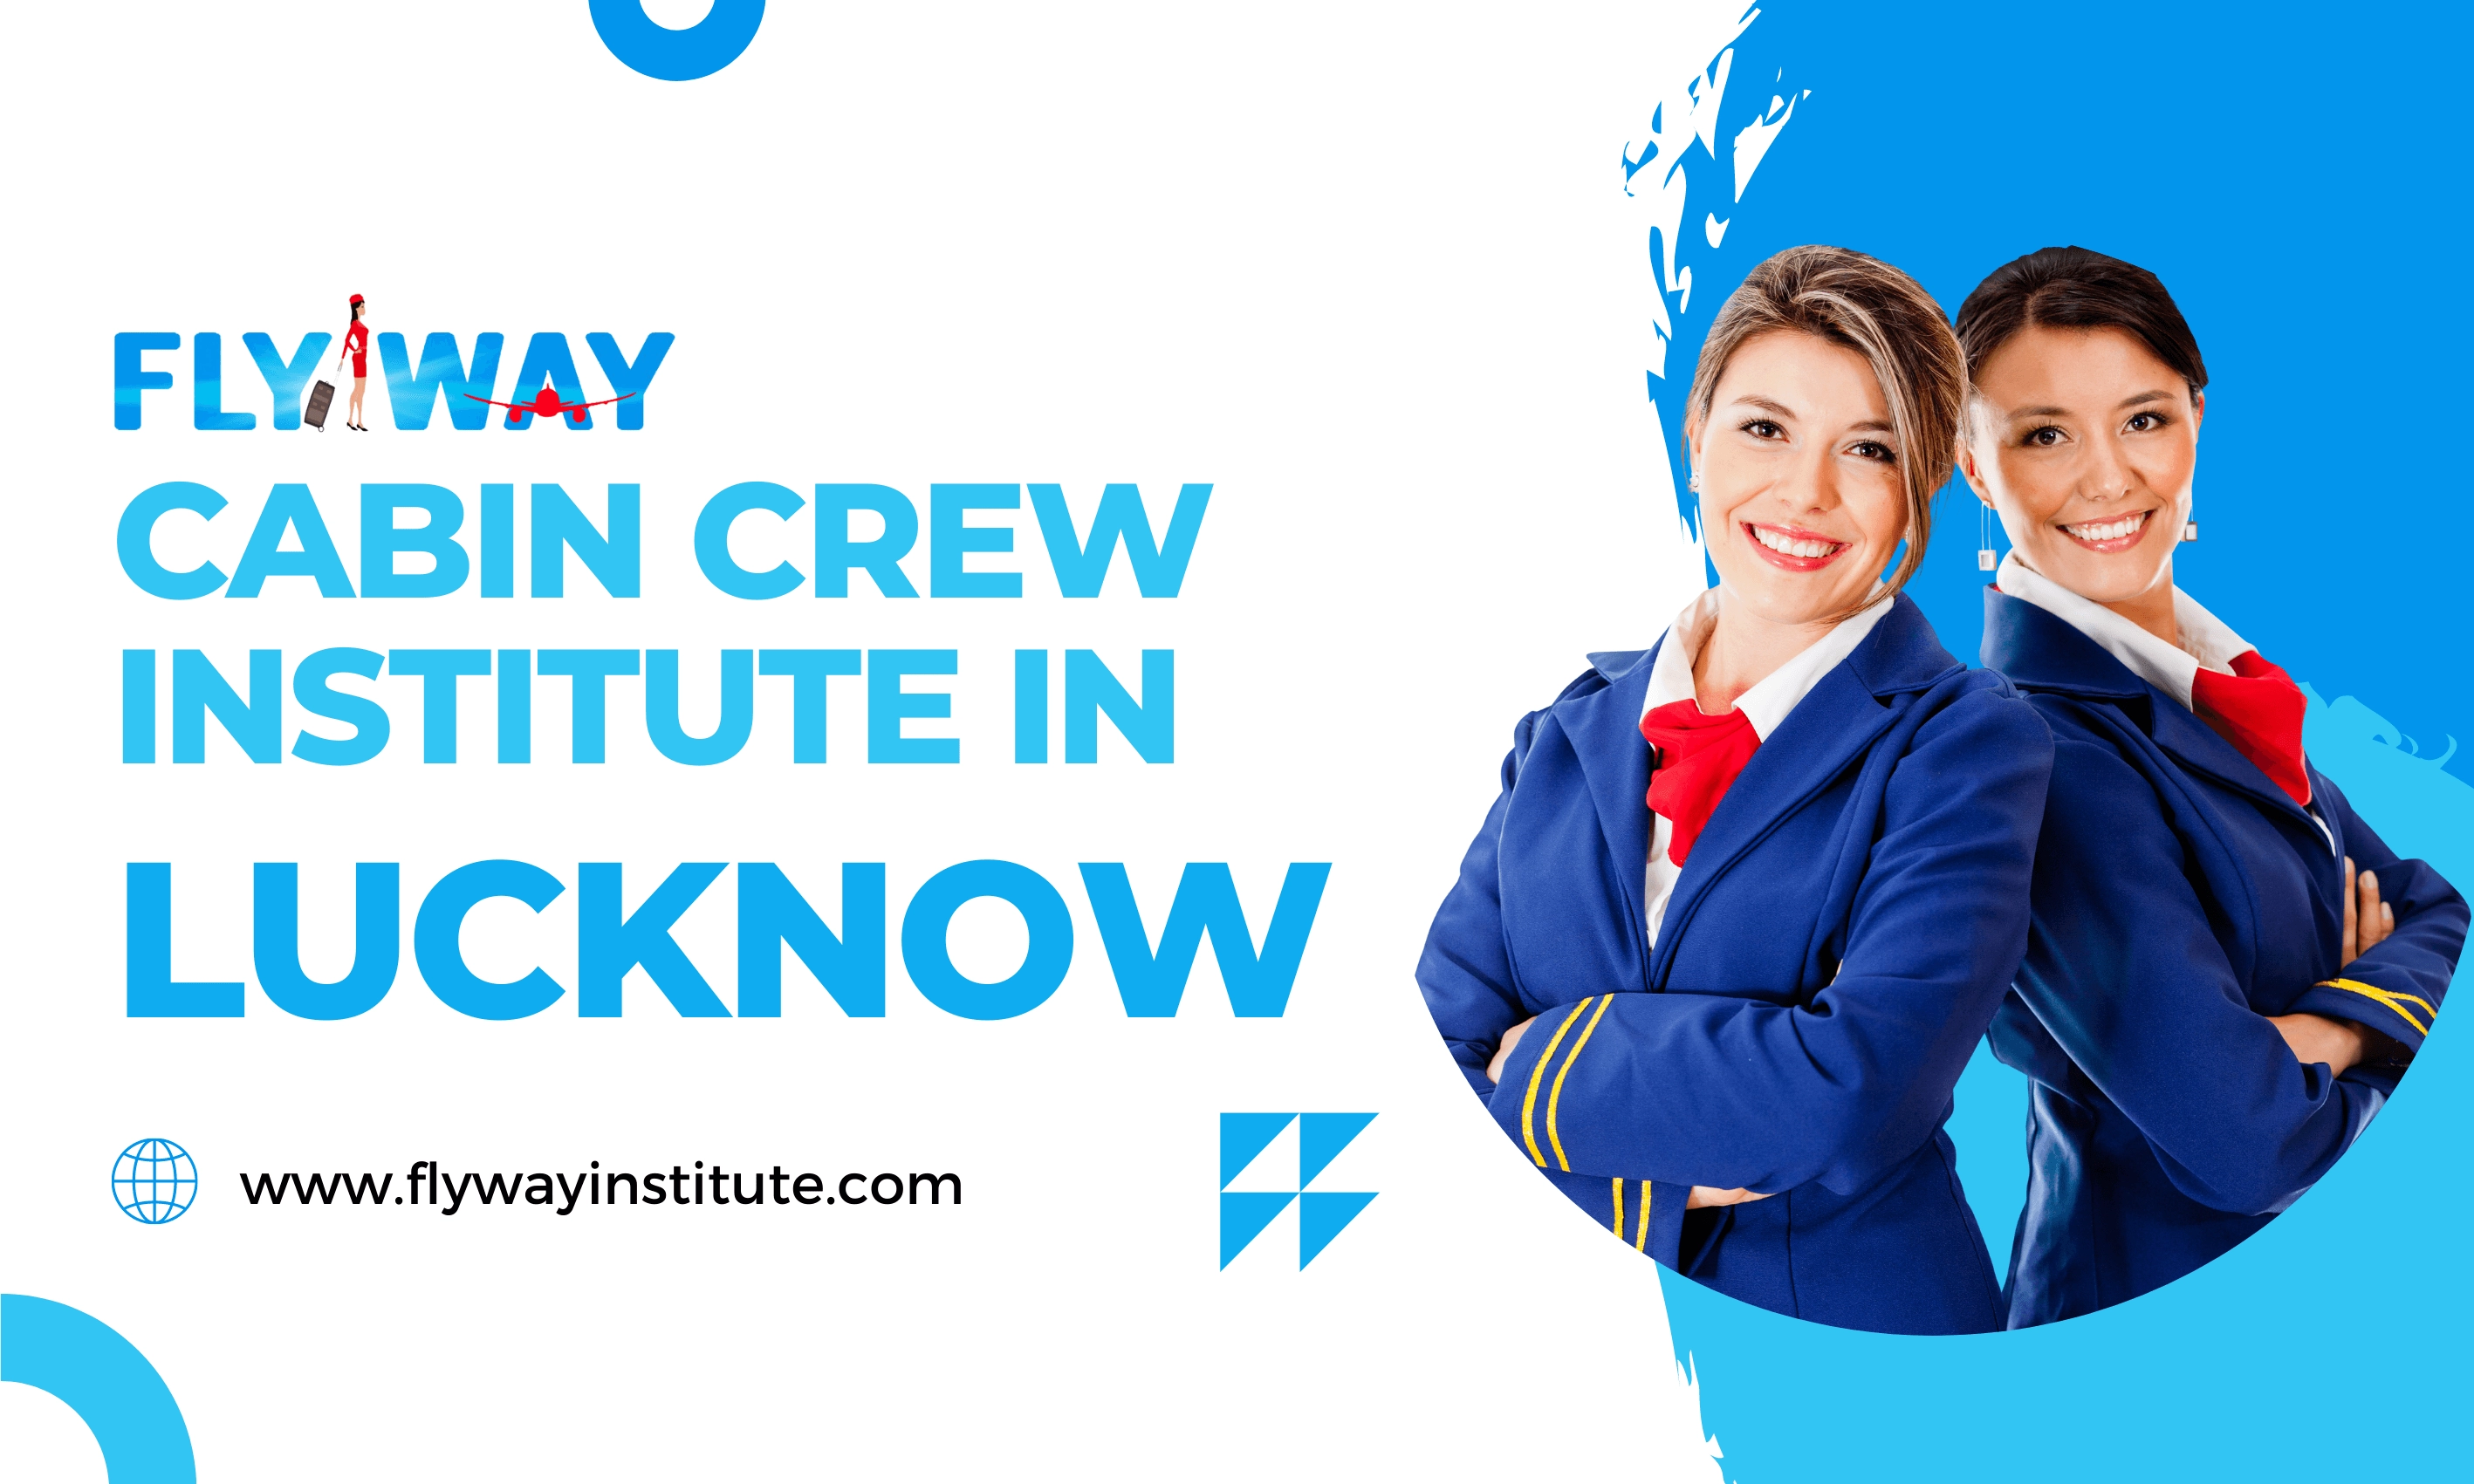 Cabin Crew Course in Lucknow- Course Details An image of Flyway Cabin Crew with text “Cabin Crew Course in Lucknow” and website: flywayinstitute.com